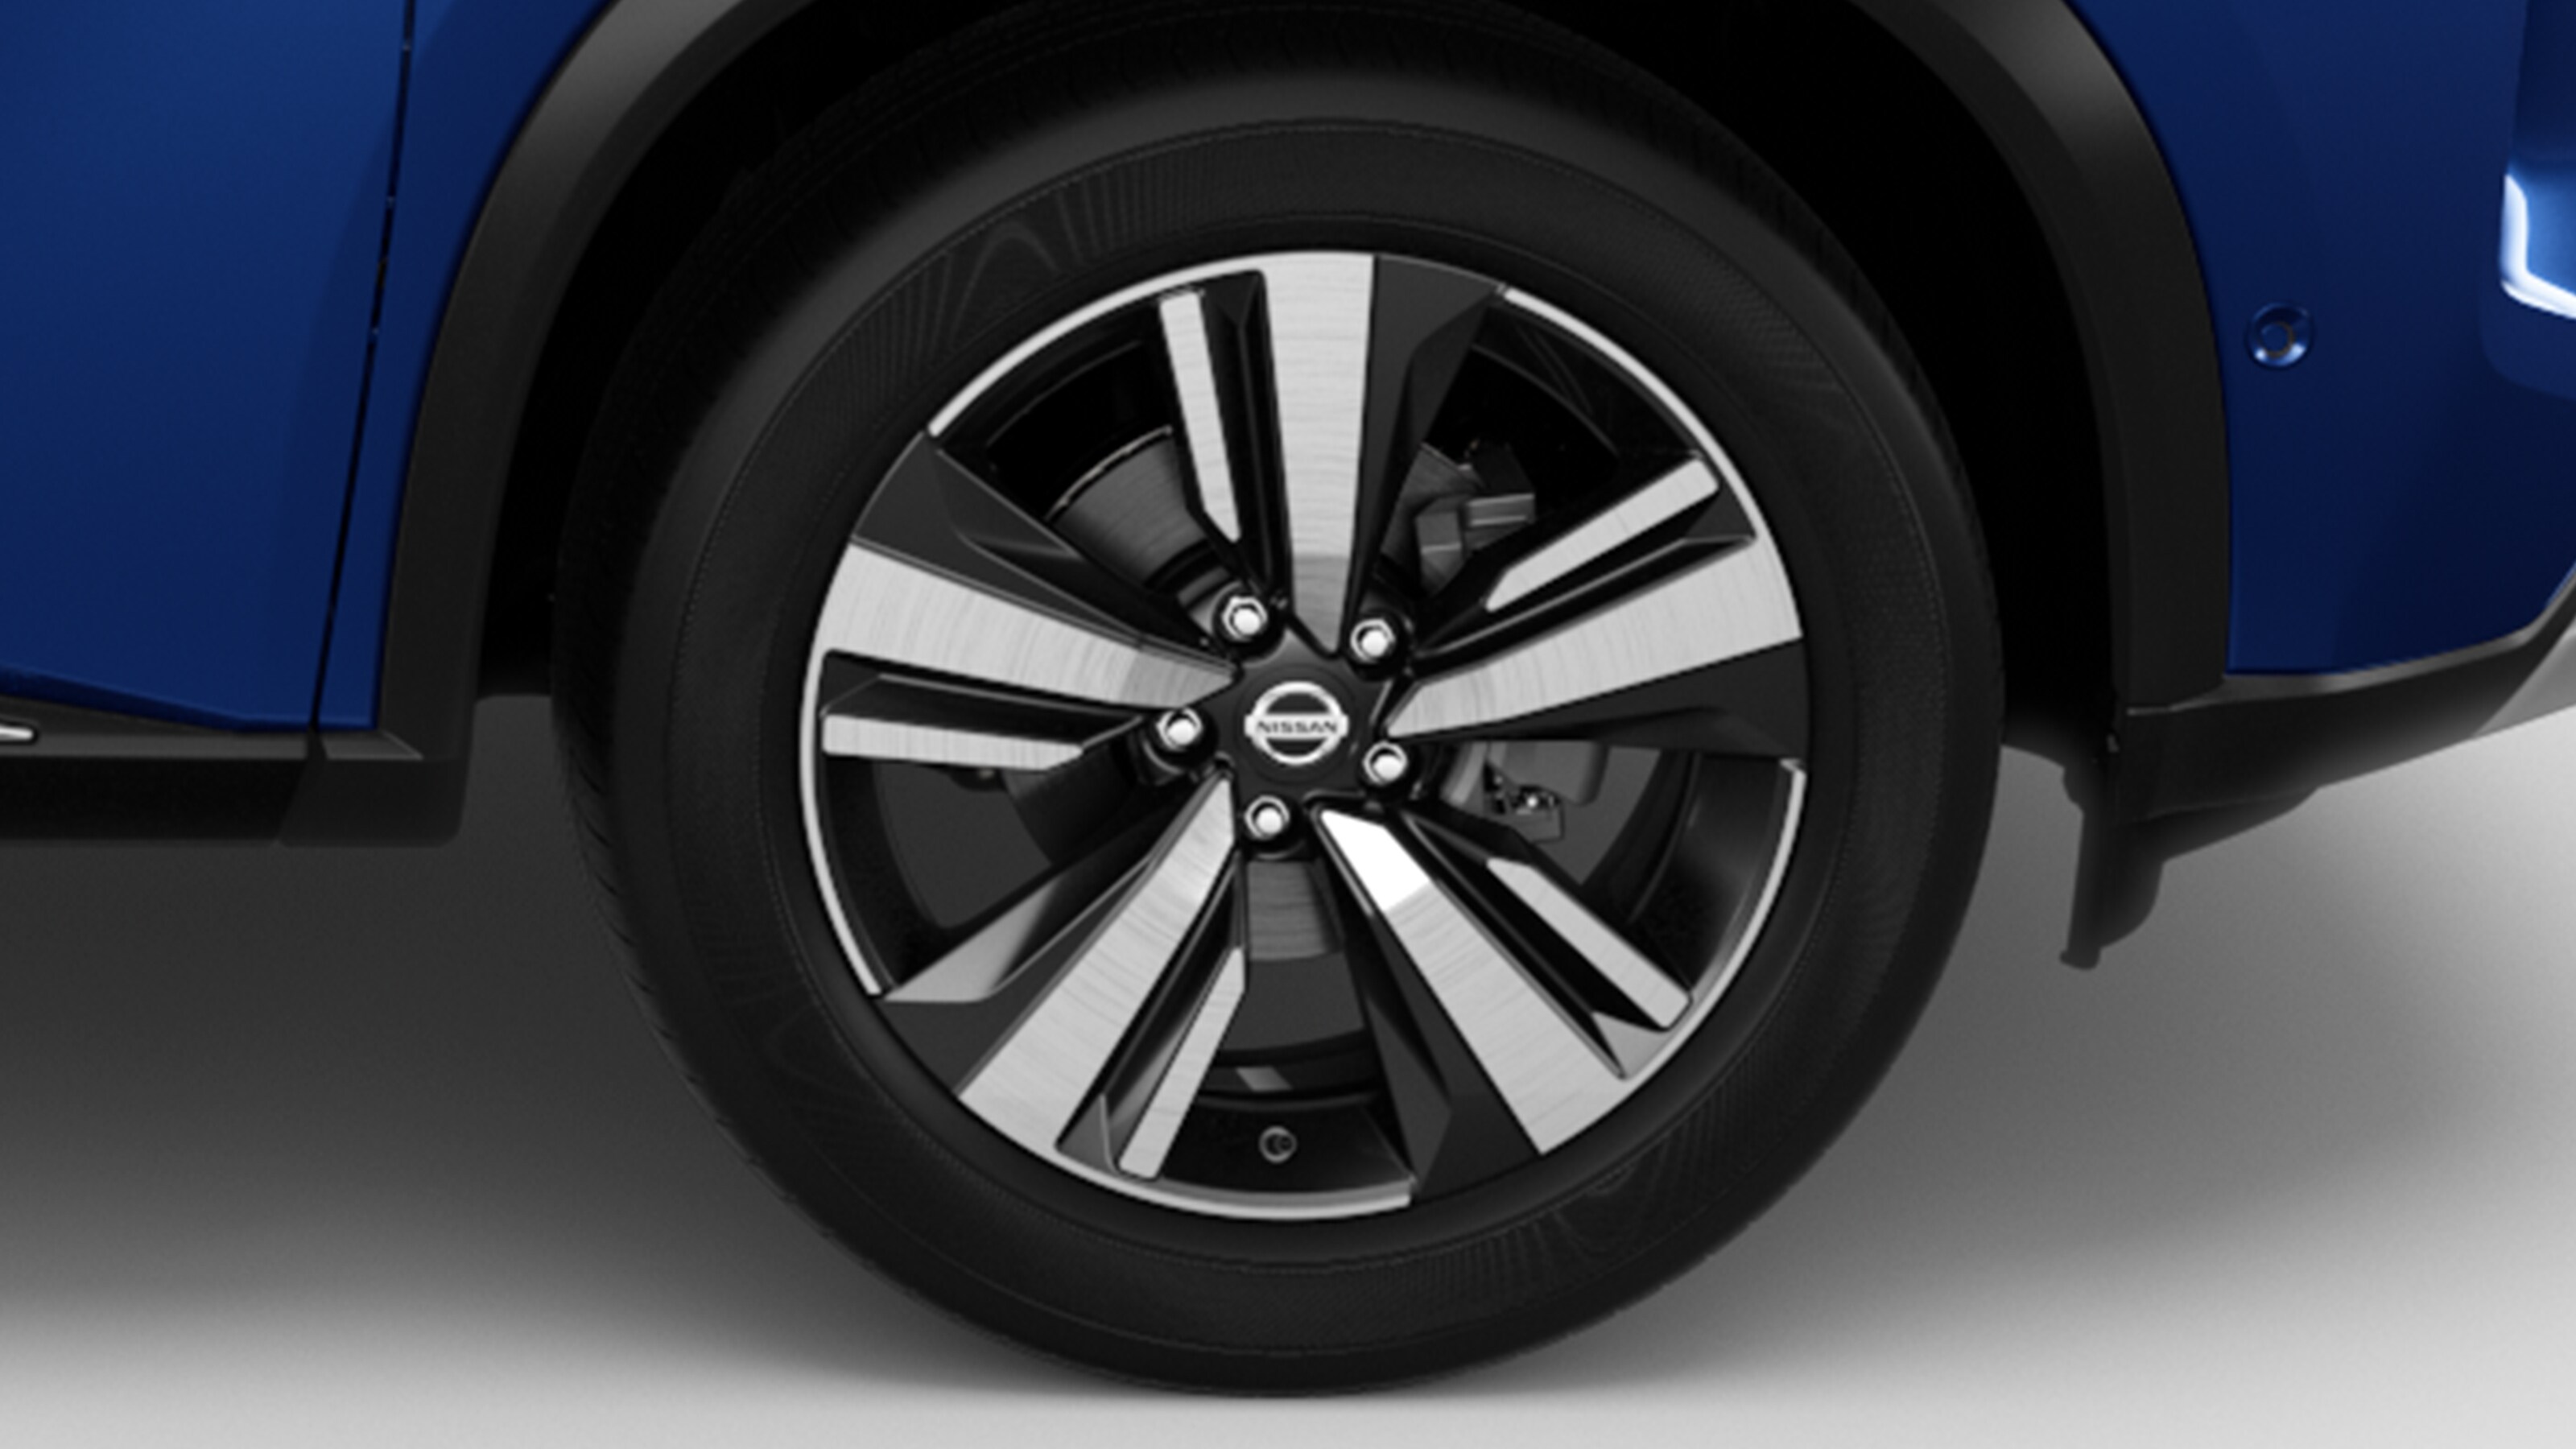 2021 Nissan Rogue tires and rims